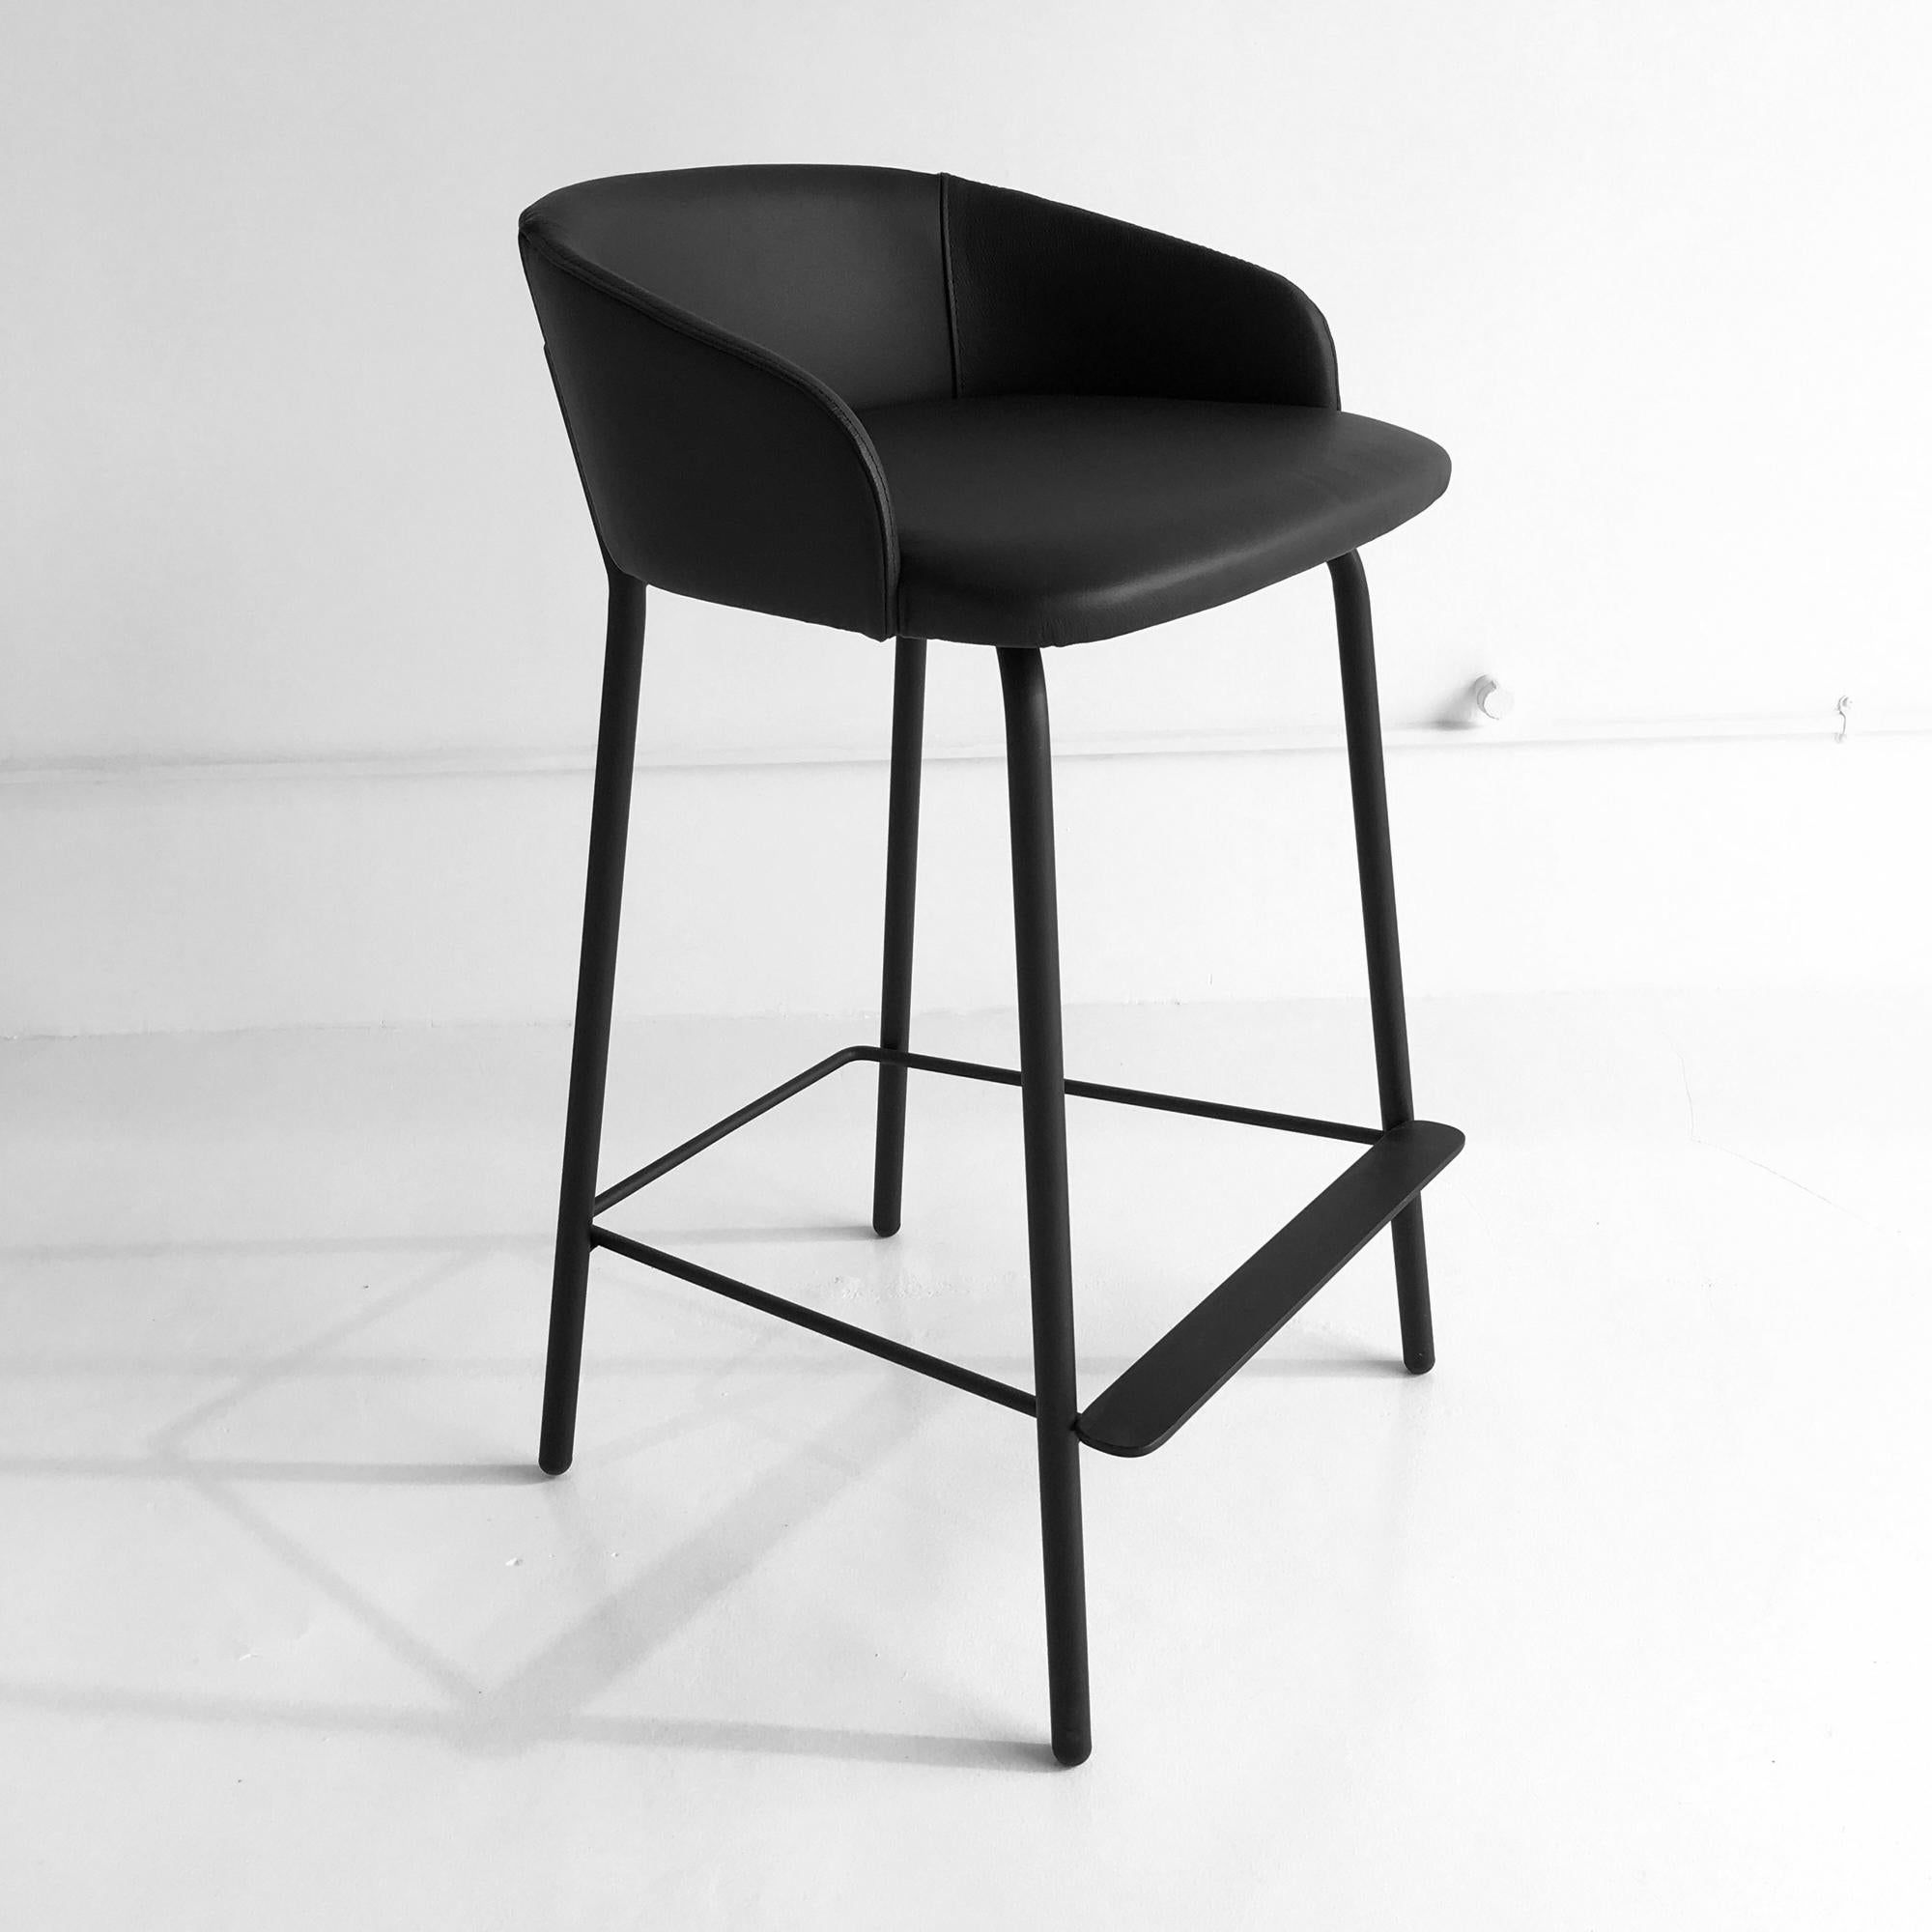 Italian In Stock in Los Angeles, Black Leather Counter Stool by Marco Zito